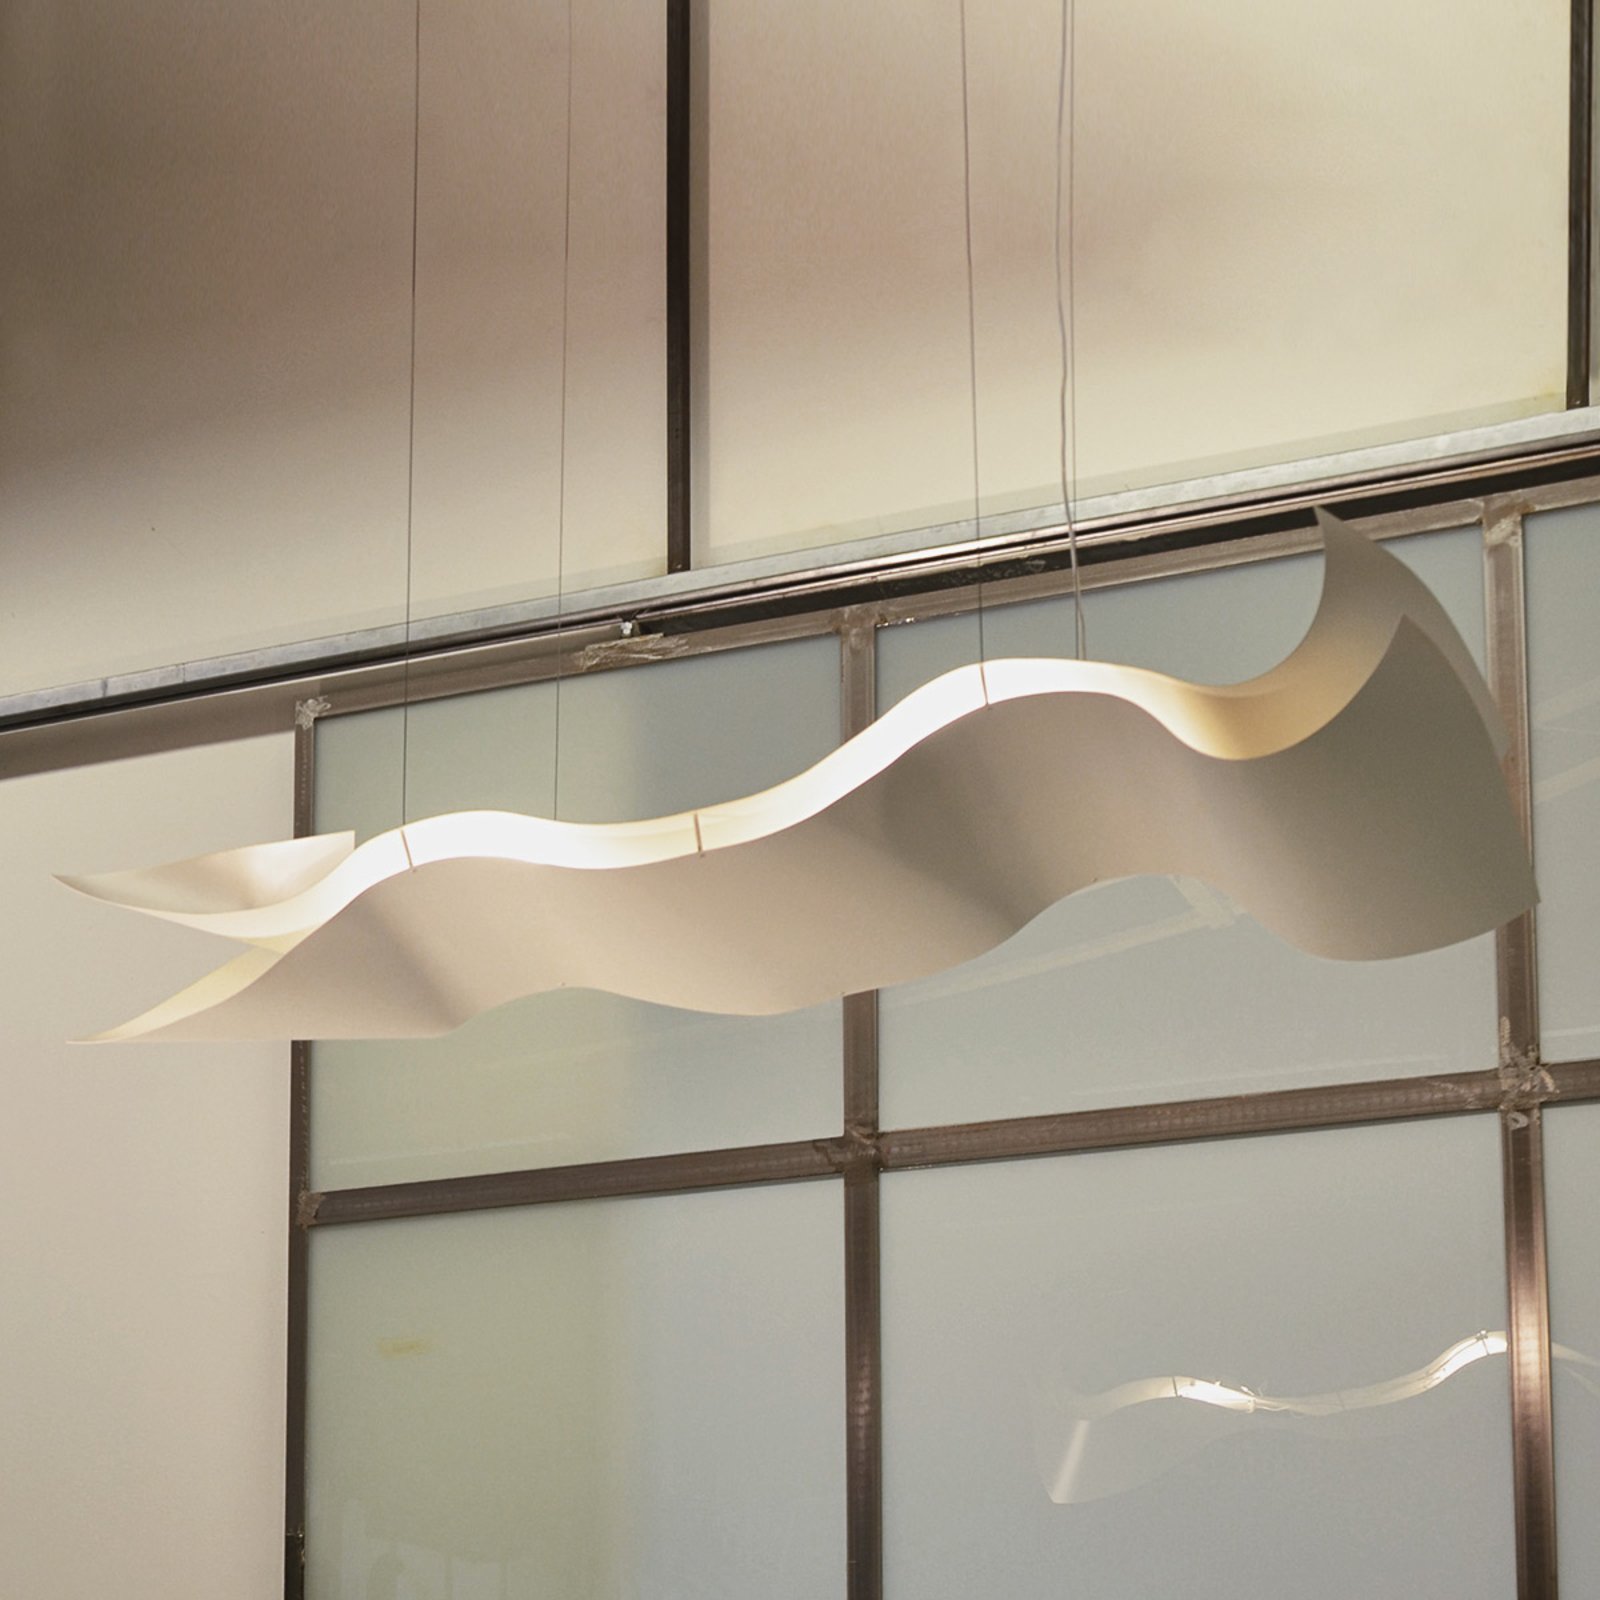 Knikerboker A Tempo Perso - white hanging light